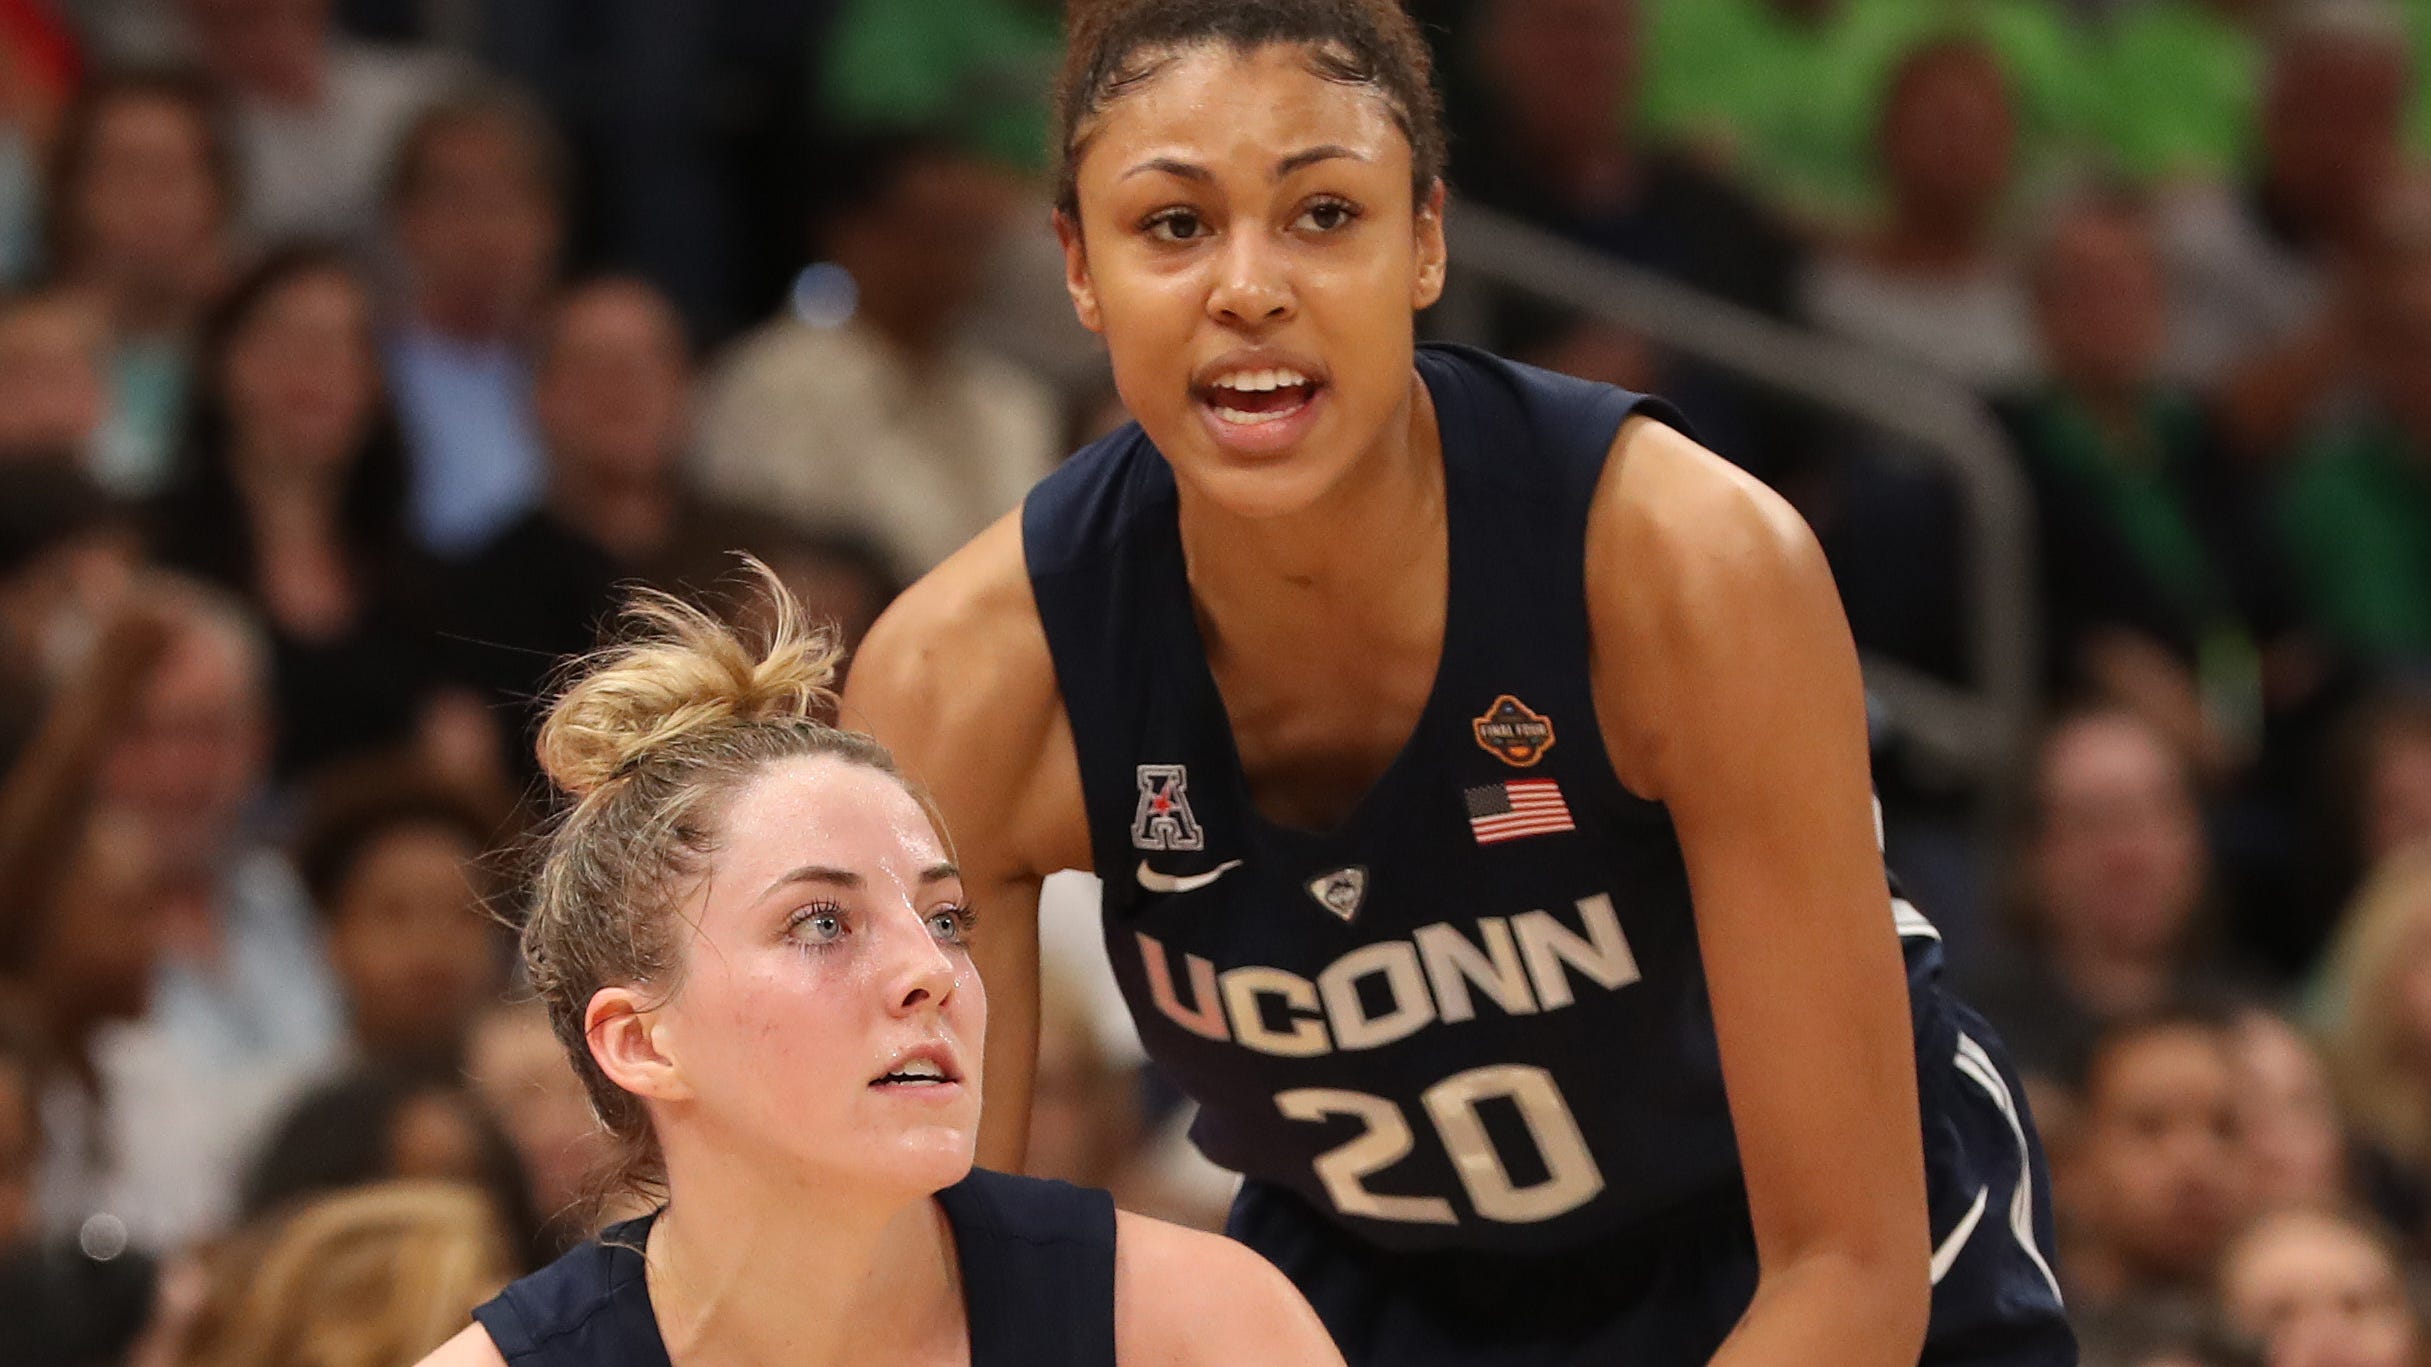 final-four-losses-becoming-familiar-for-uconn-women-s-basketball-team